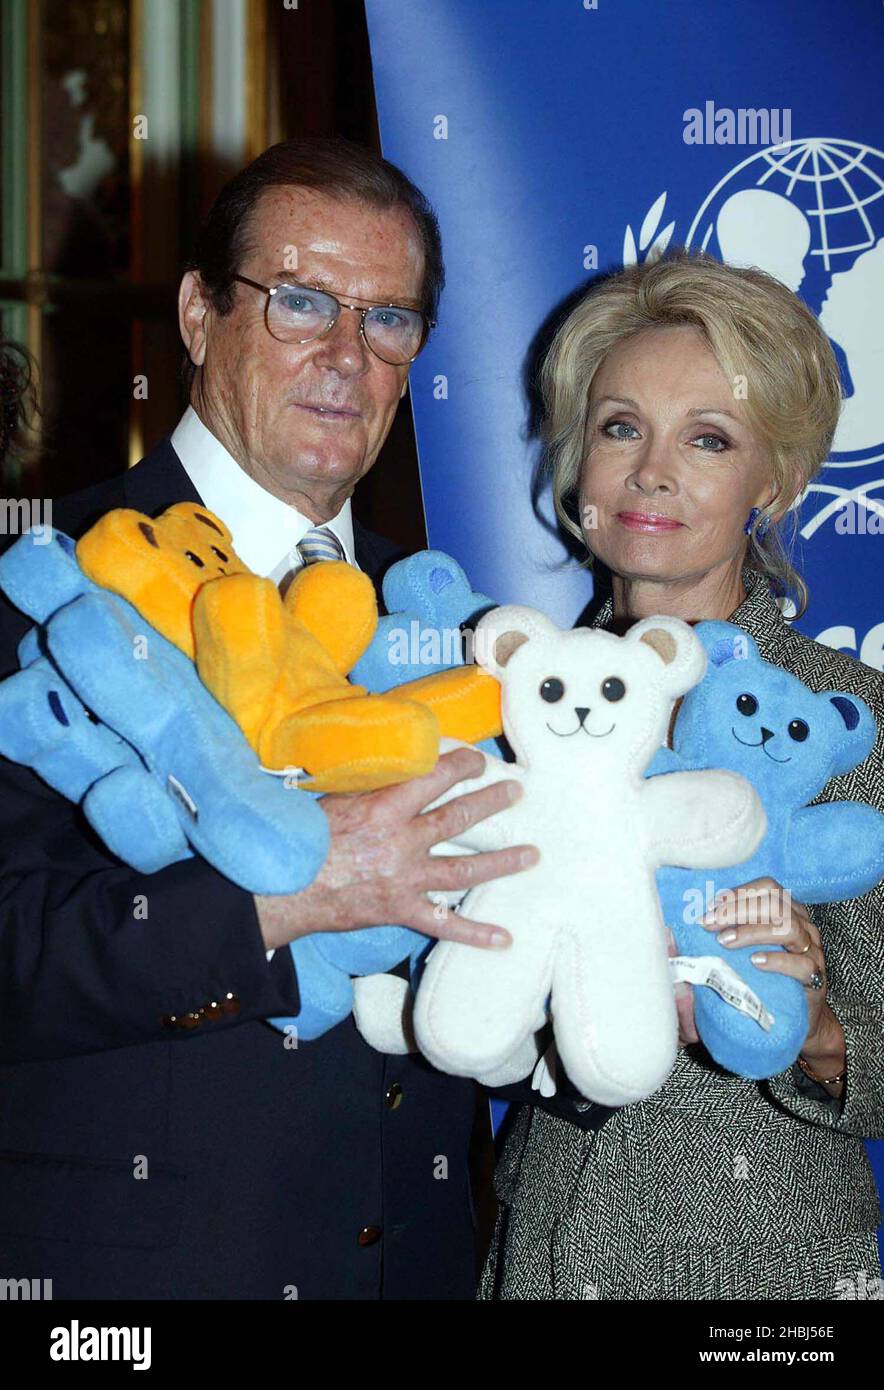 Sir Roger Moore with teddy bears and his wife Lady Christina supports UNICEF & Ikea at the Ritz West London Stock Photo